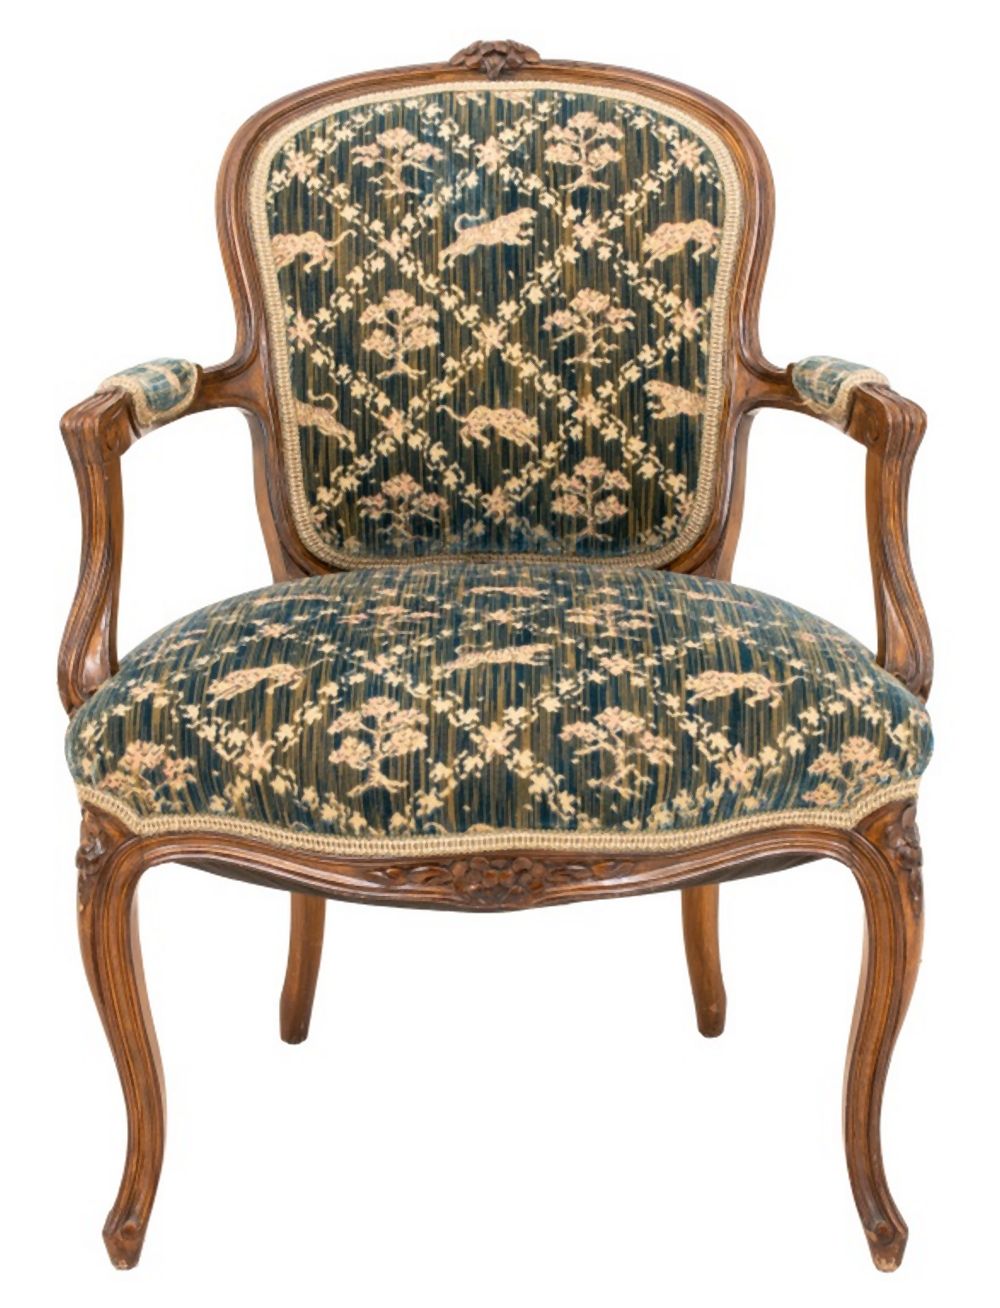 LOUIS XV STYLE ARM CHAIR OR FAUTEUIL 2fc559